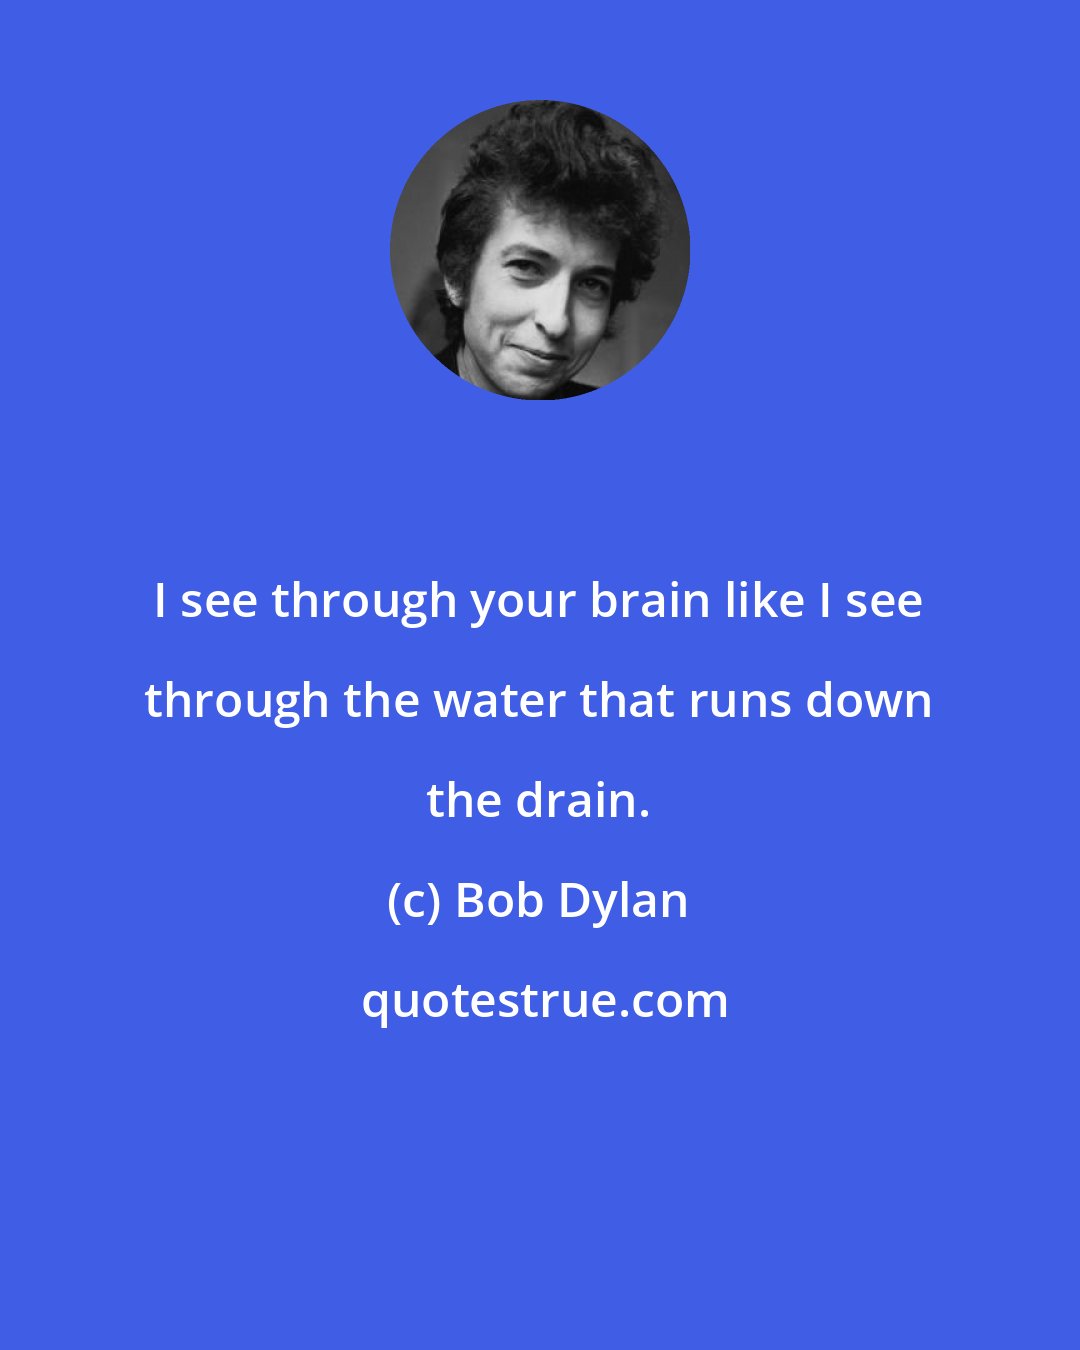 Bob Dylan: I see through your brain like I see through the water that runs down the drain.